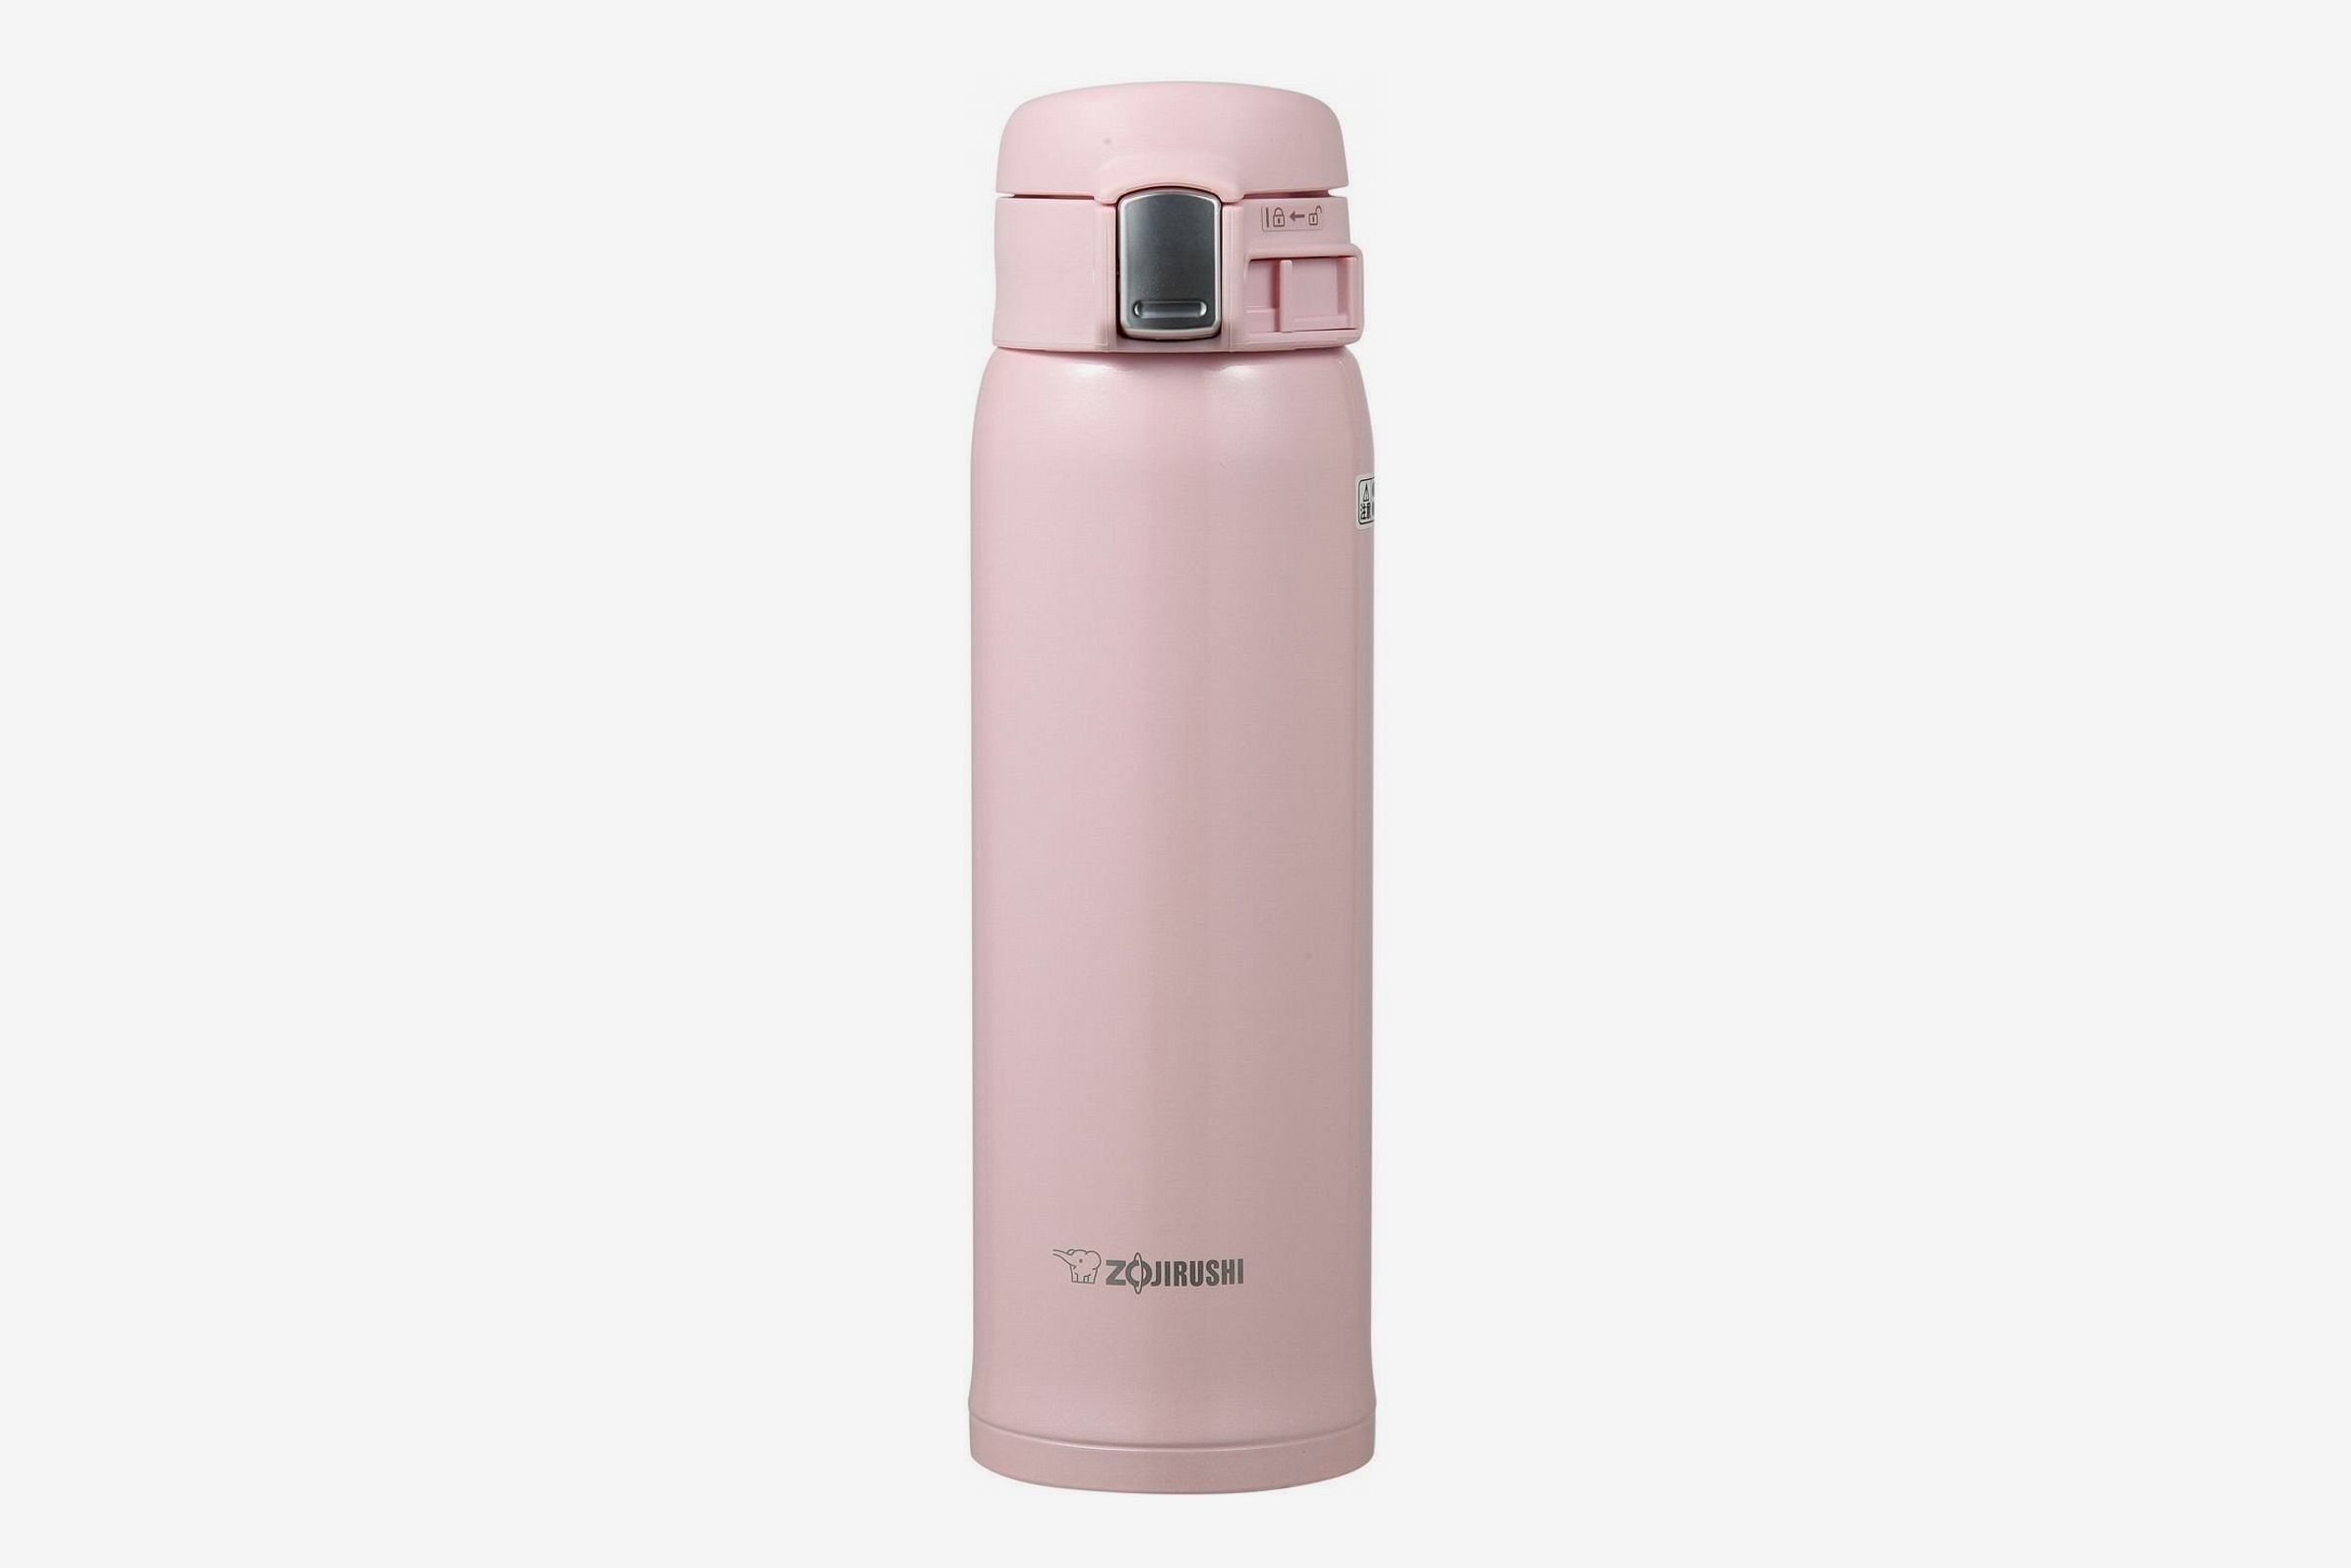 Hydro Flask vs Zojirushi - Which is the Better Bottle?